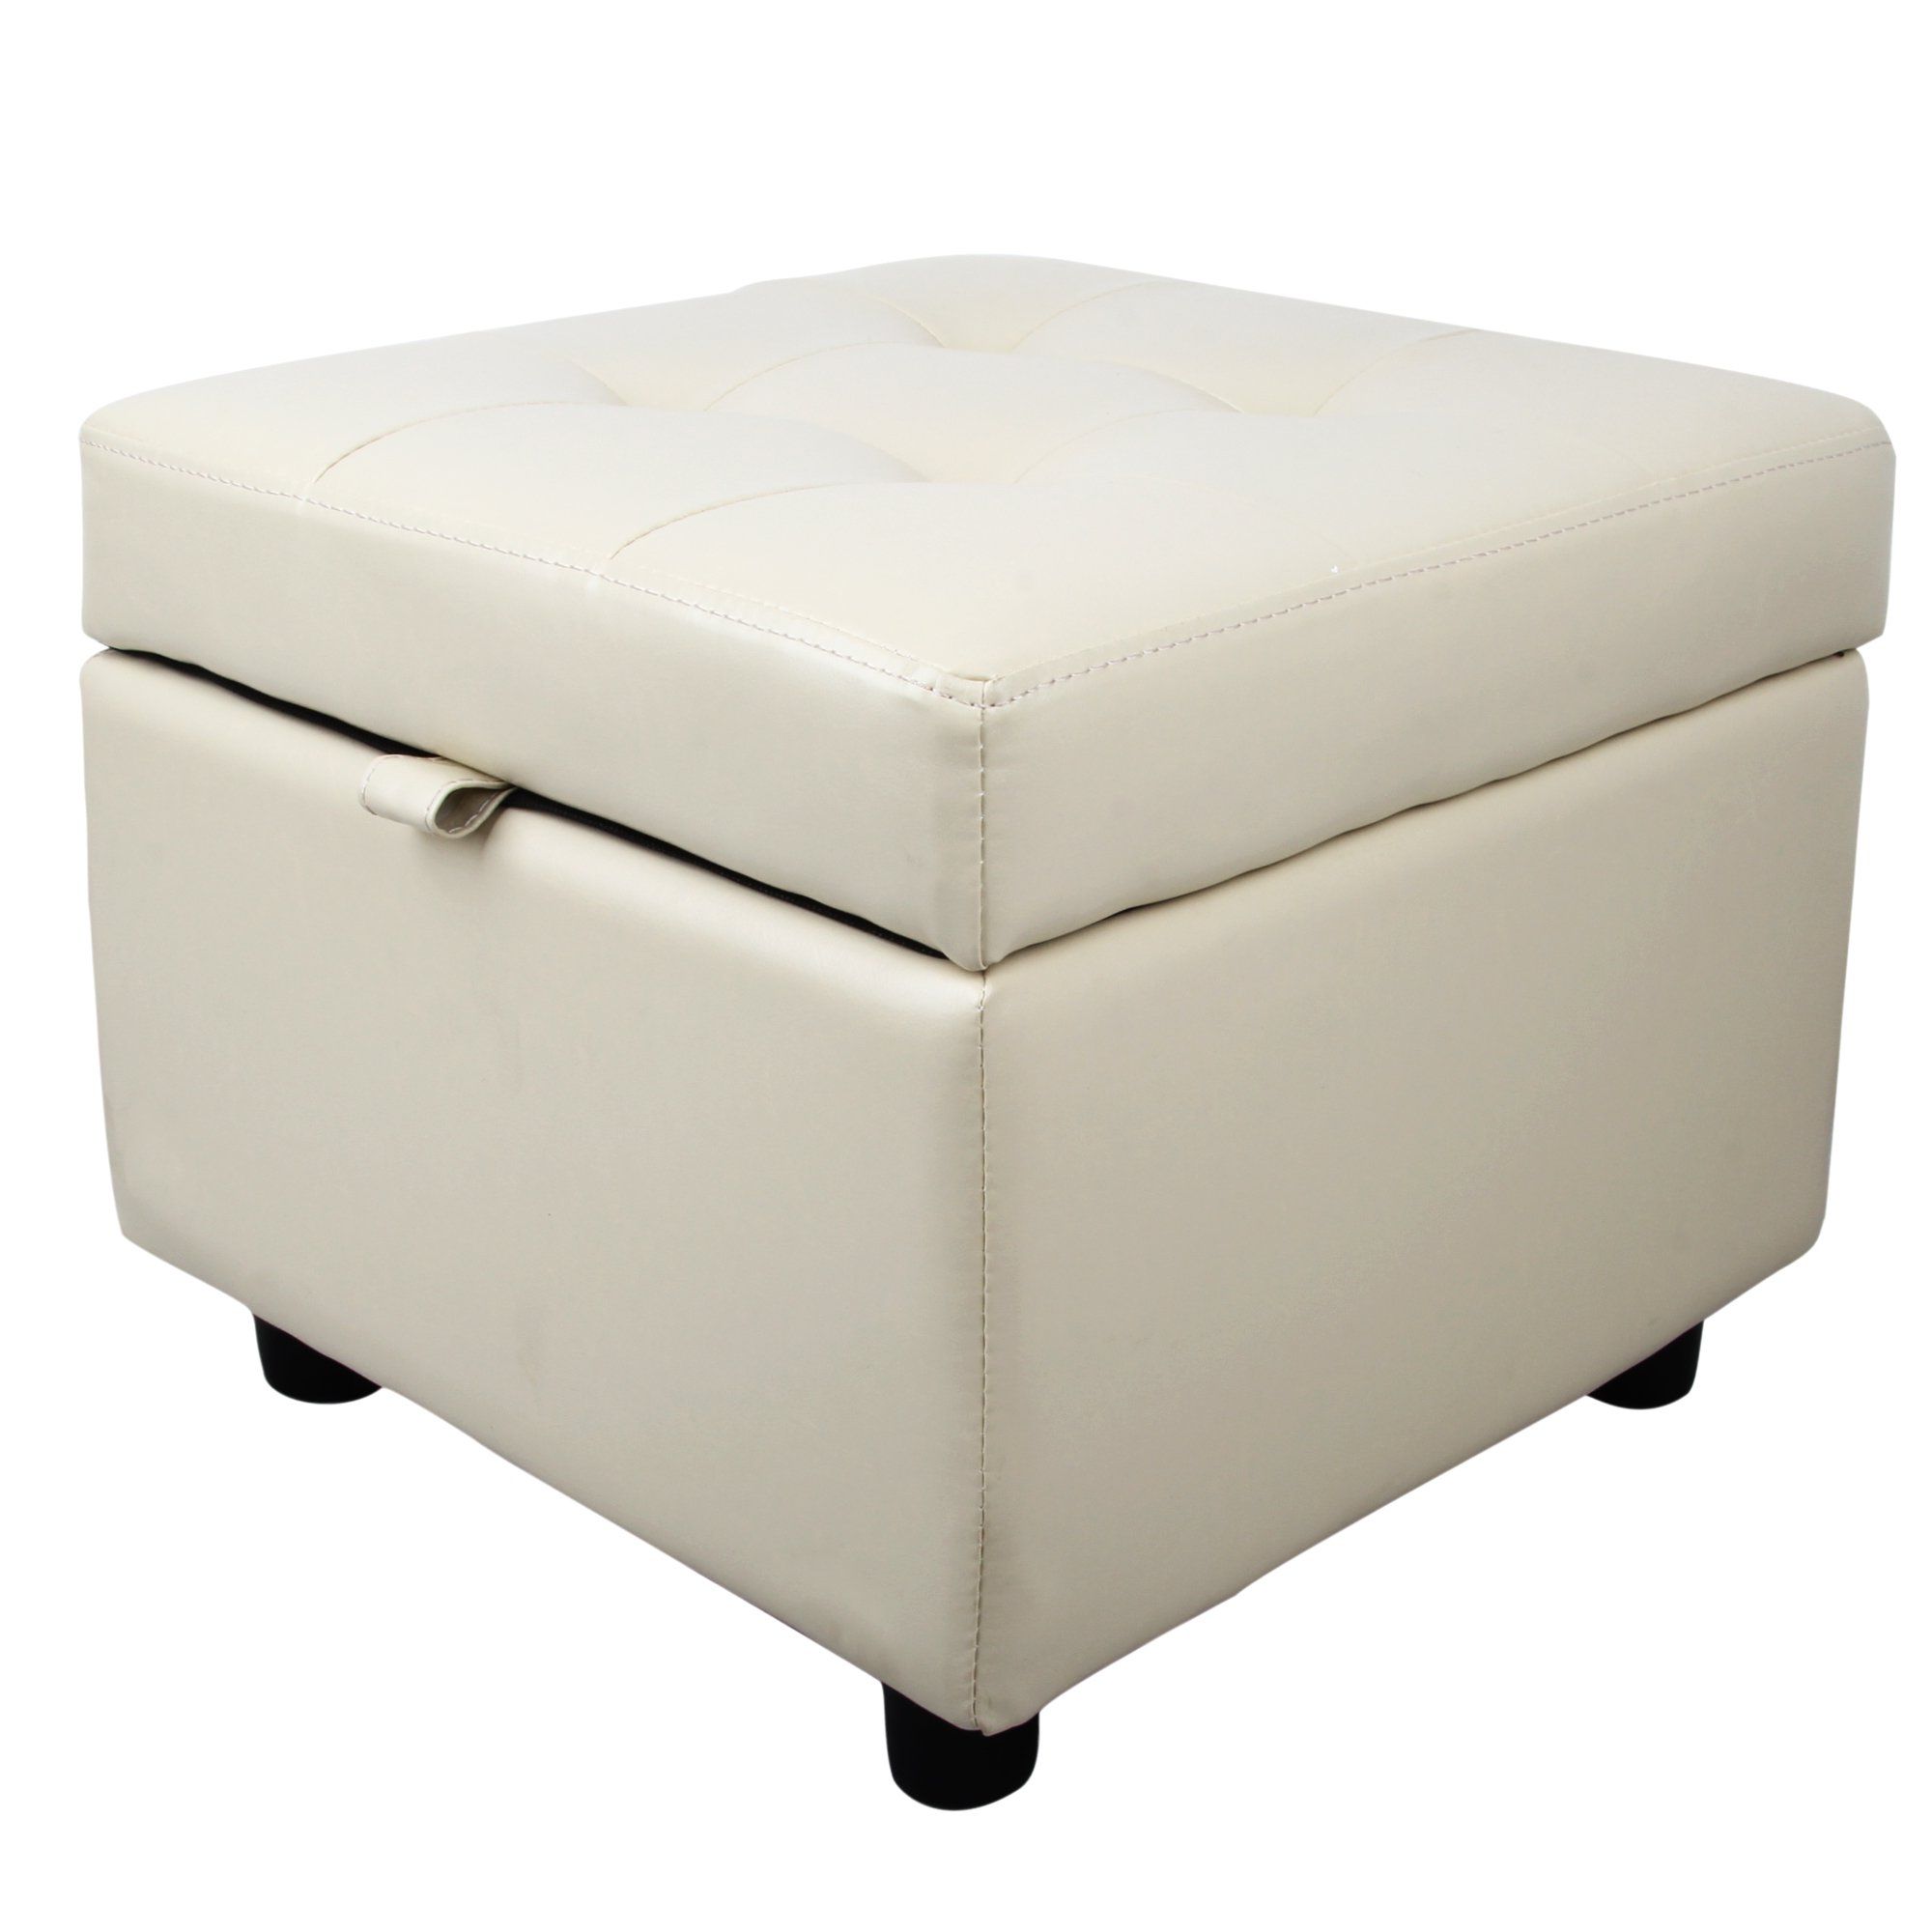 Newest Tufted Leather Square Flip Top Storage Ottoman Cube Foot Rest (cream With Regard To Square Cube Ottomans (View 8 of 10)